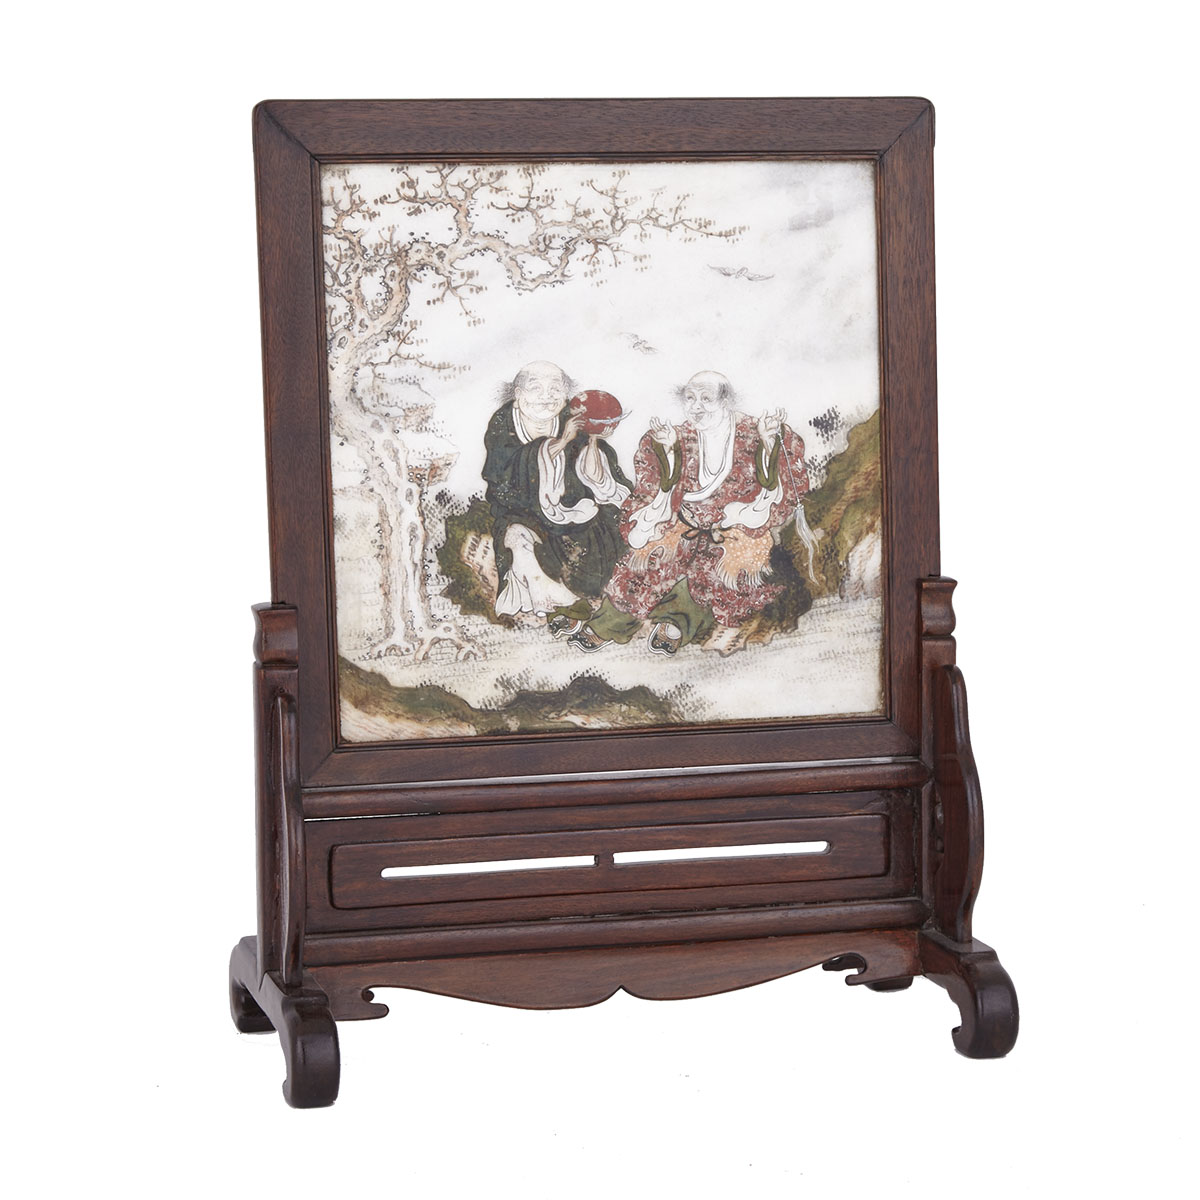 Huanghuali Table Screen with Hehe Erxian Marble Inlaid, 19th Century